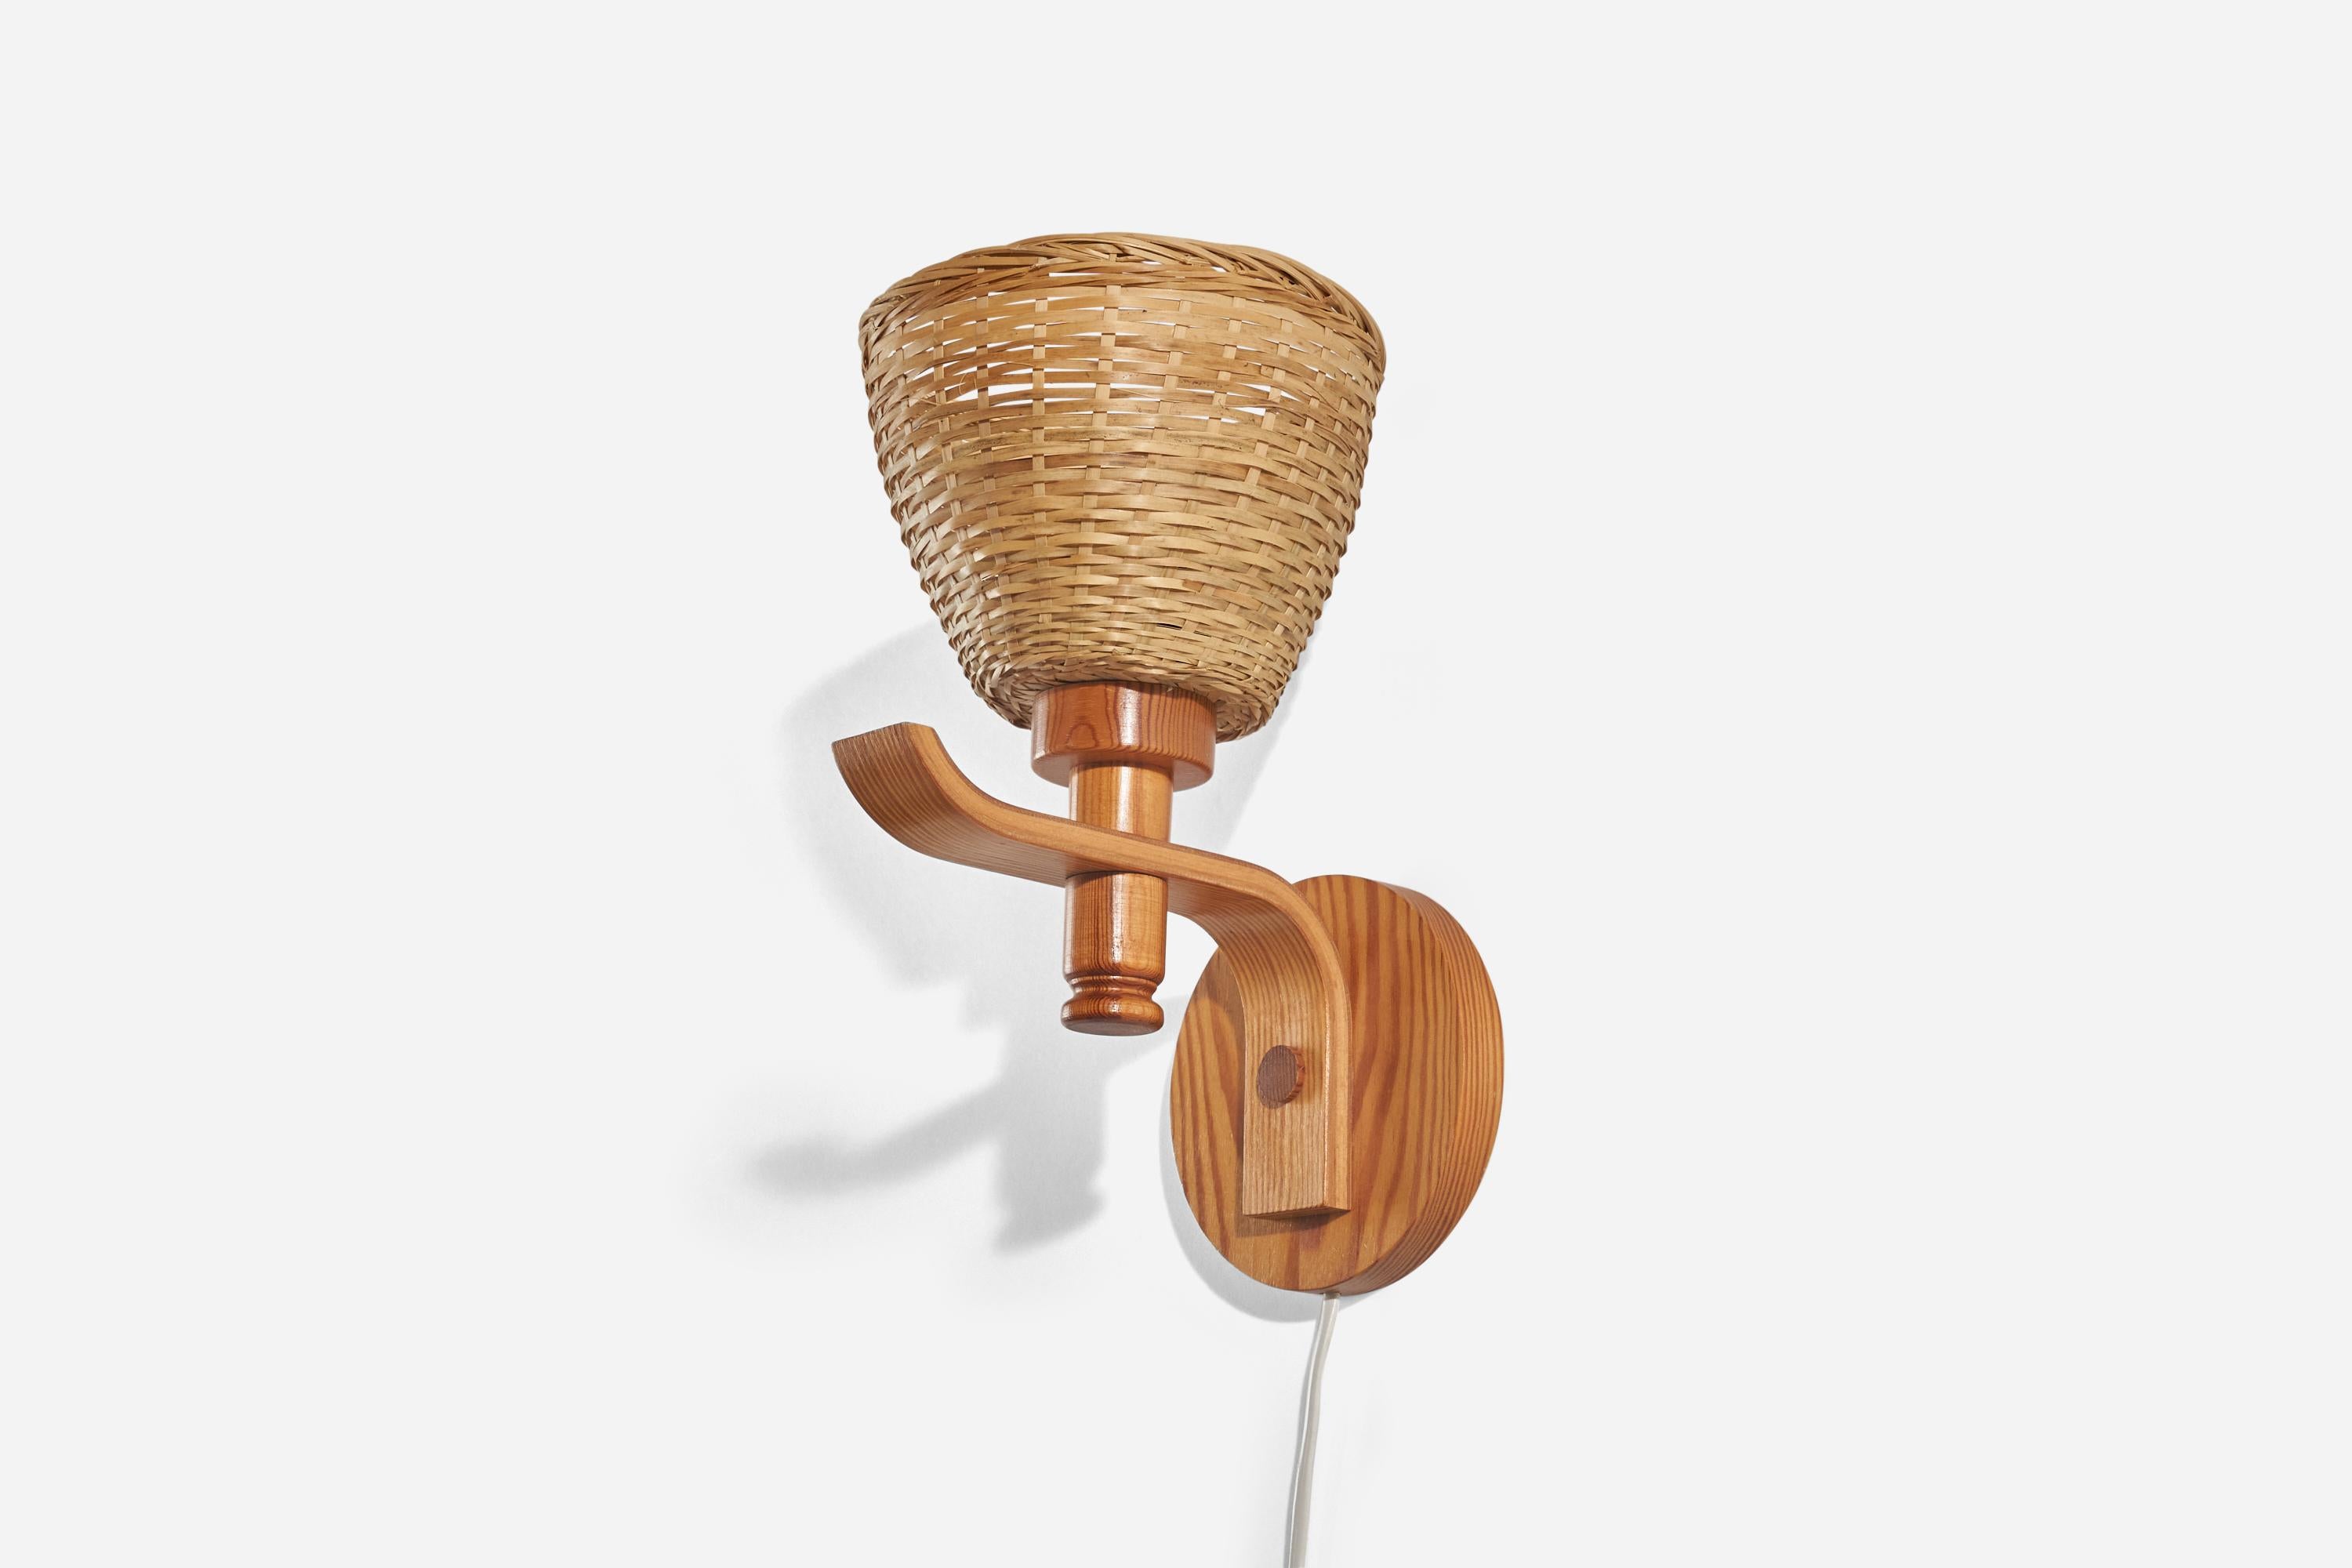 A pine and rattan wall light designed and produced in Sweden, 1970s.

Sold with Lampshade(s). Dimensions stated are of Sconce with Shade(s).

Dimensions of Back Plate (inches) : 5.49 x 5.49 x 0.78 (Height x Width x Depth).

Socket takes